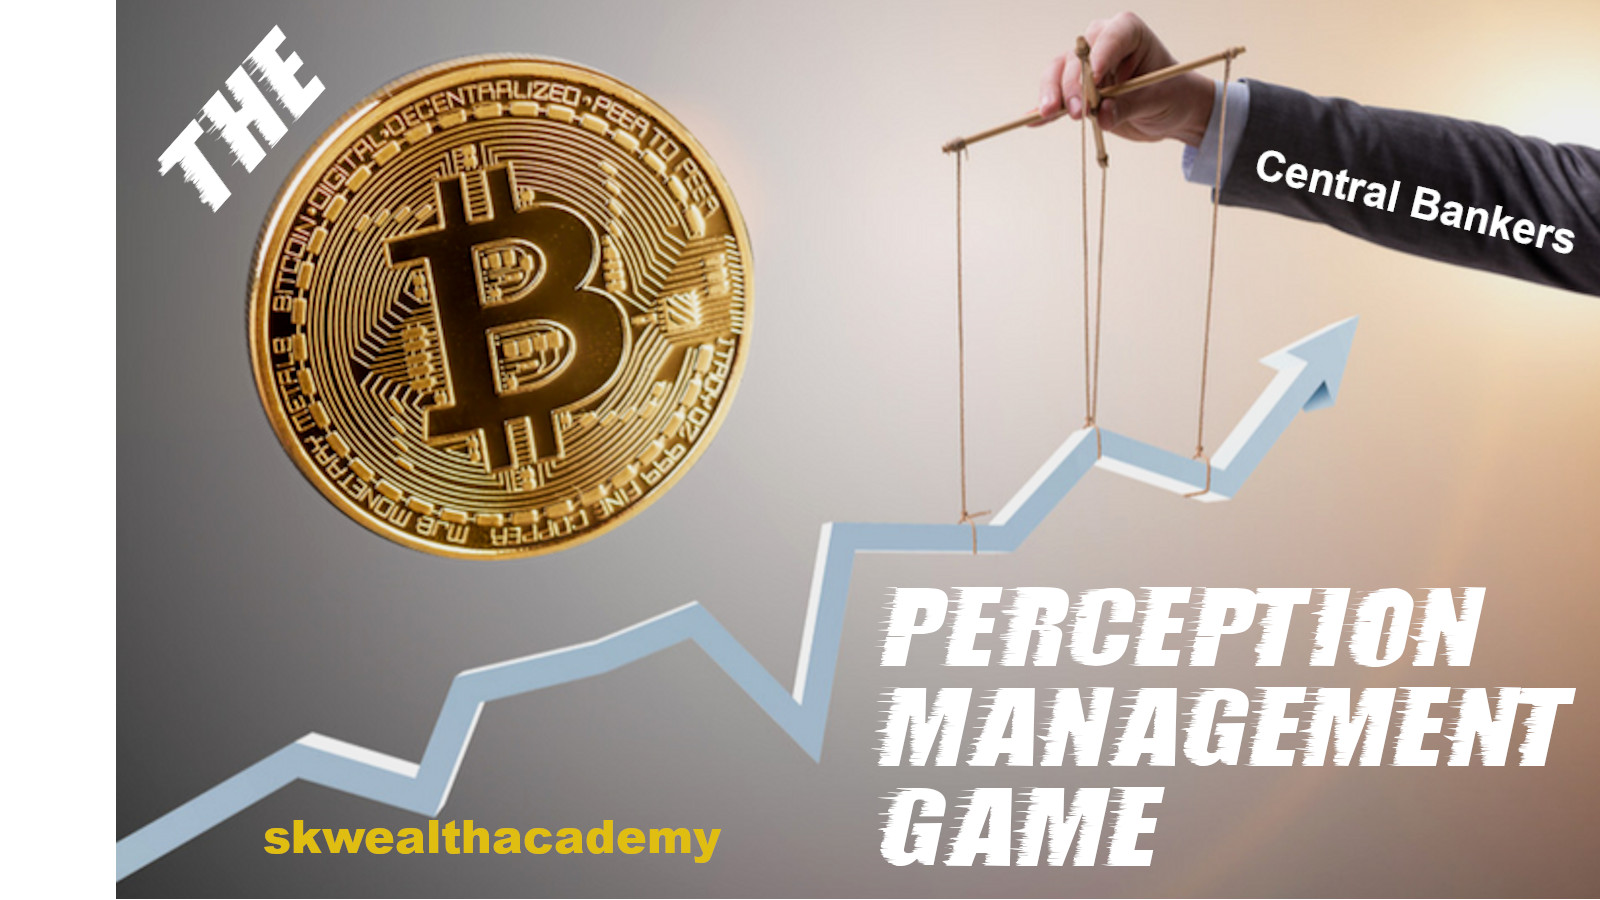 the Central Banking cartel's bitcoin perception management game is strong